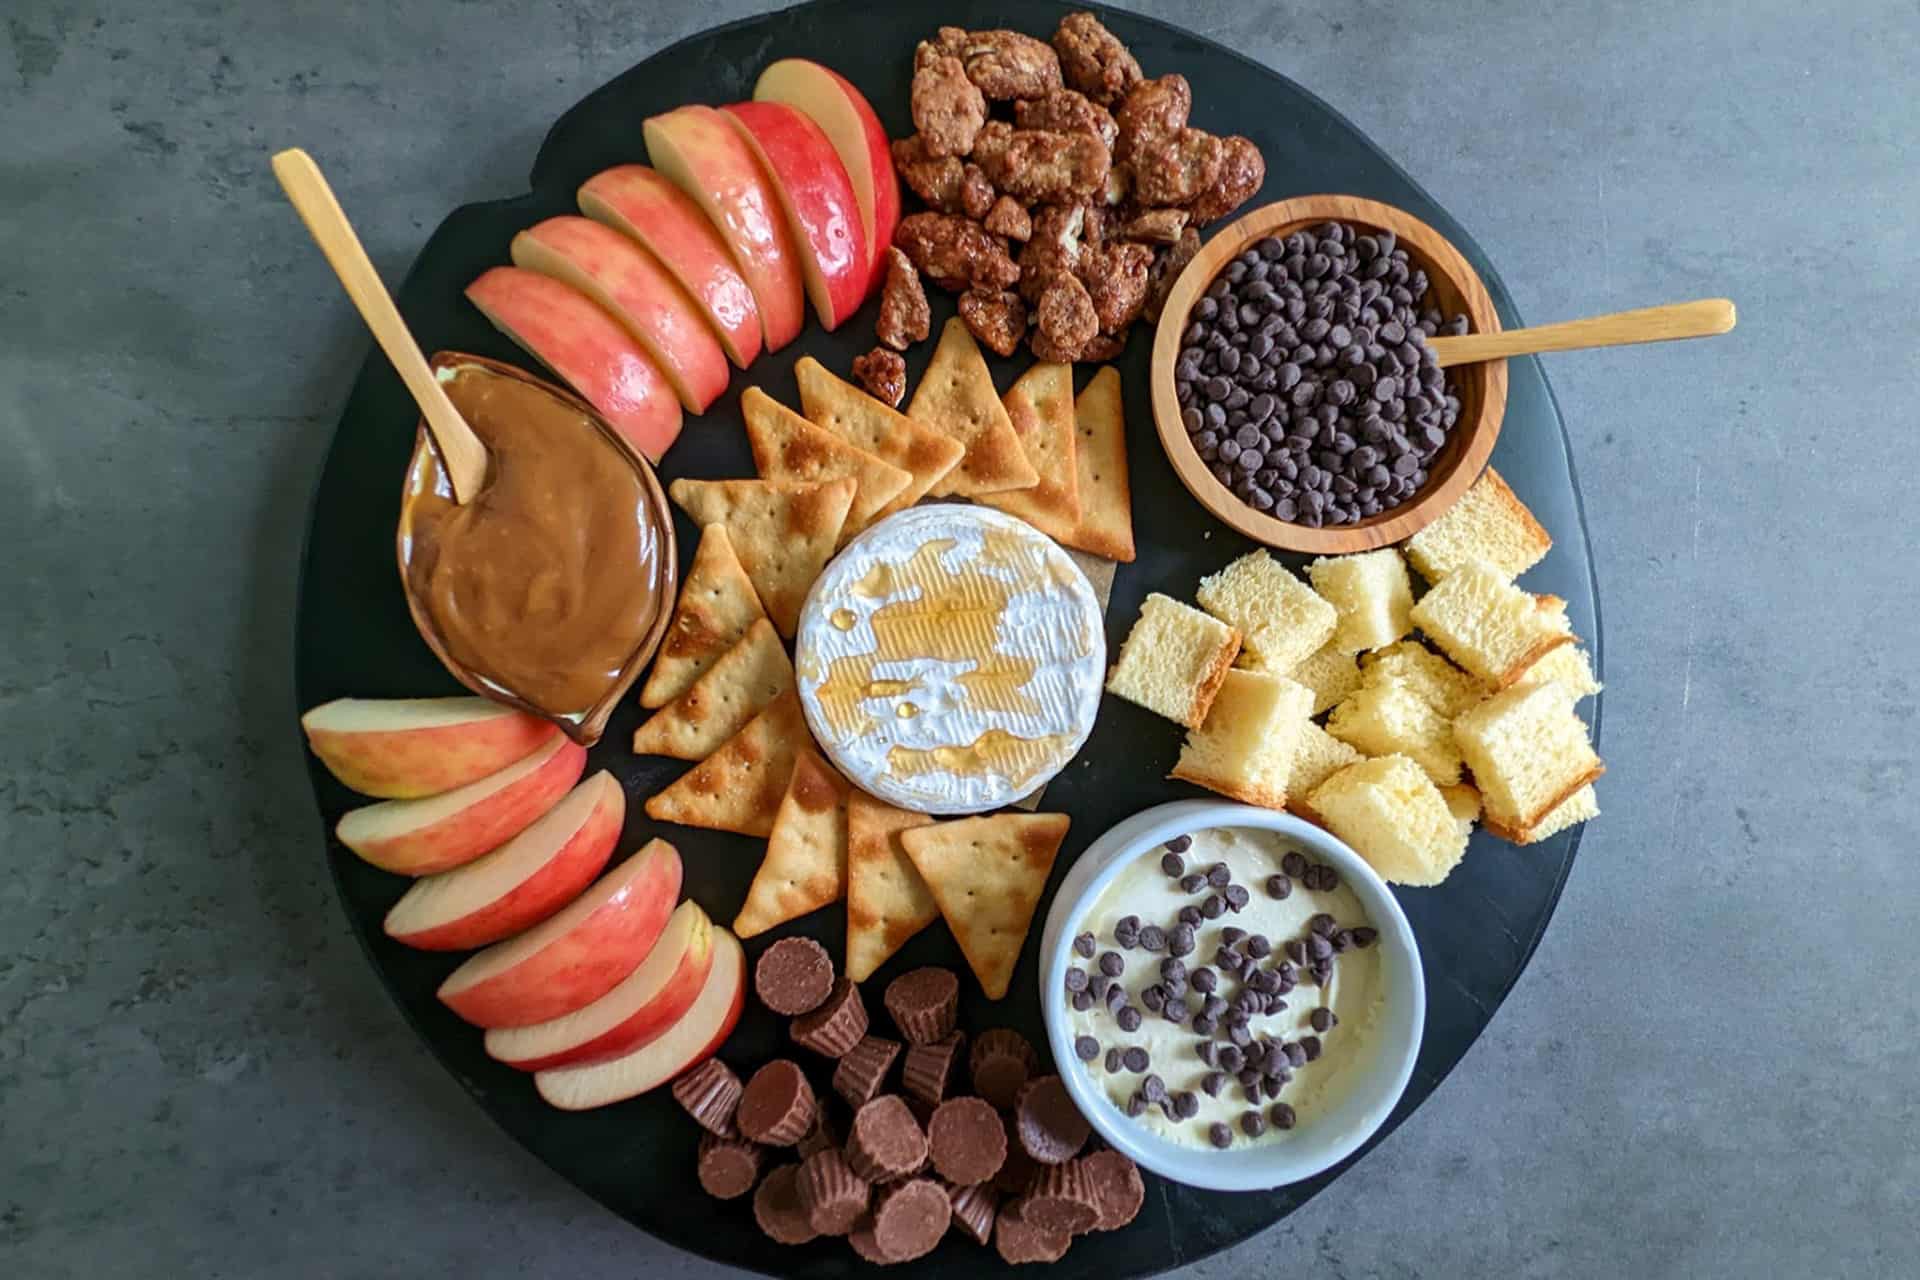 A sweet charcuterie board with apples, caramel, crackers, brie, mascarpone, brioche, candied nuts, and chocolates